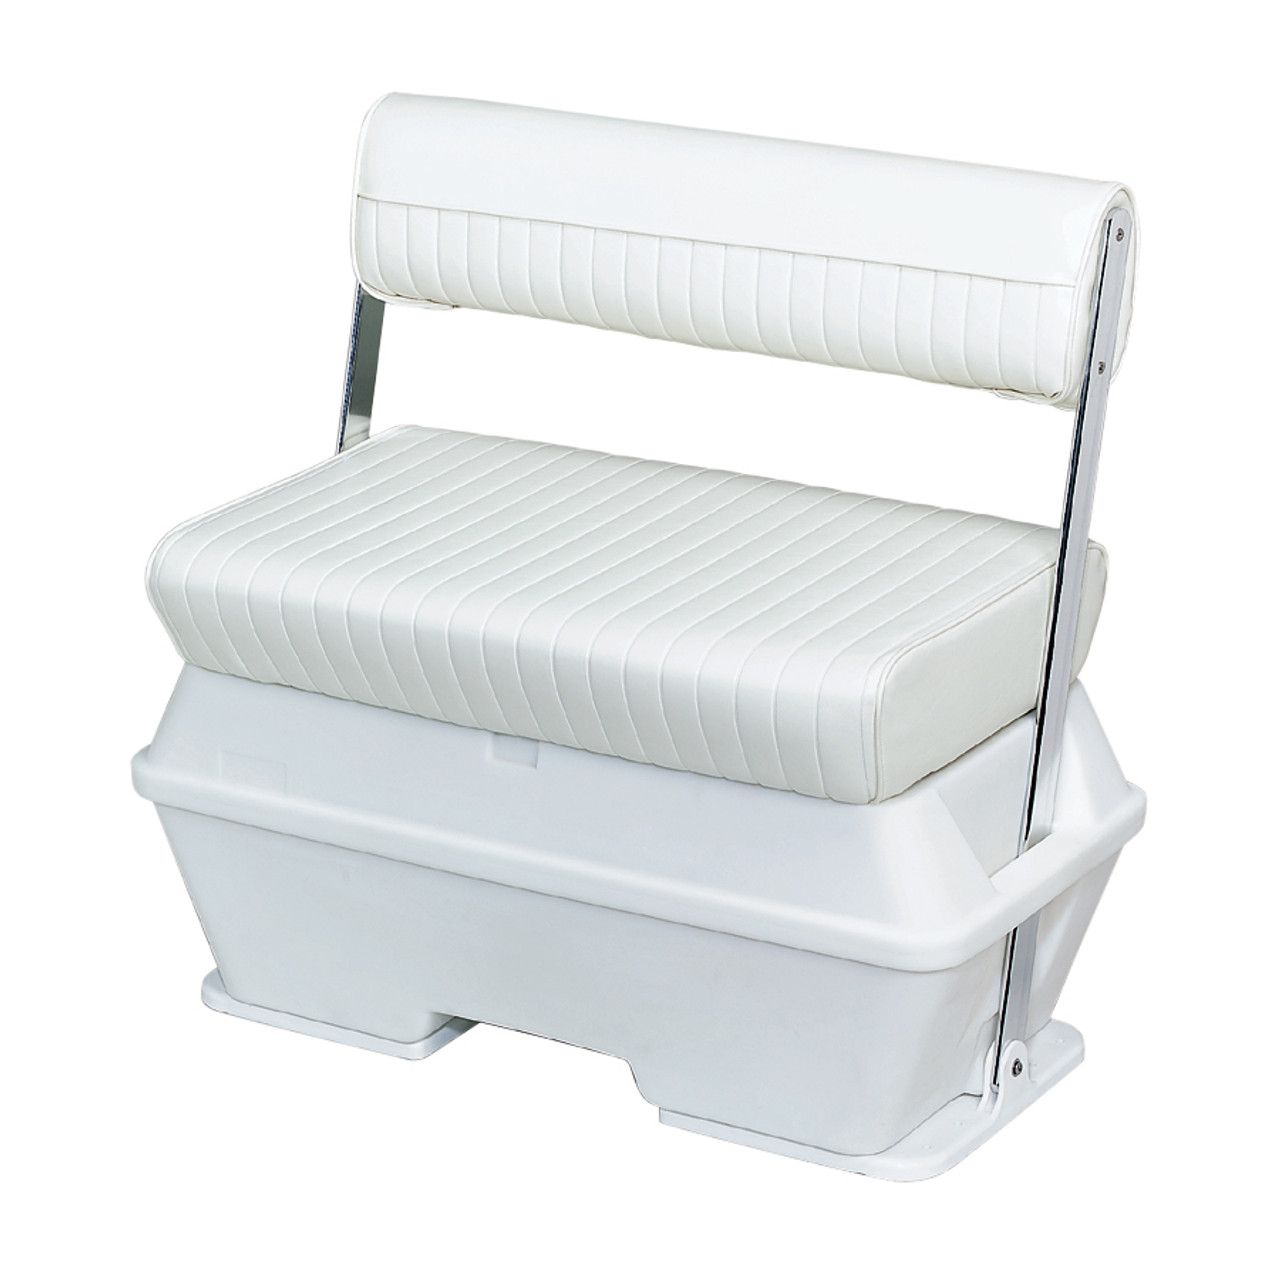 https://cdn11.bigcommerce.com/s-uprkx/images/stencil/1280x1280/products/50674/257695/wise-boat-cooler-seat-8WD159-brite-white__60483.1423240467.jpg?c=2